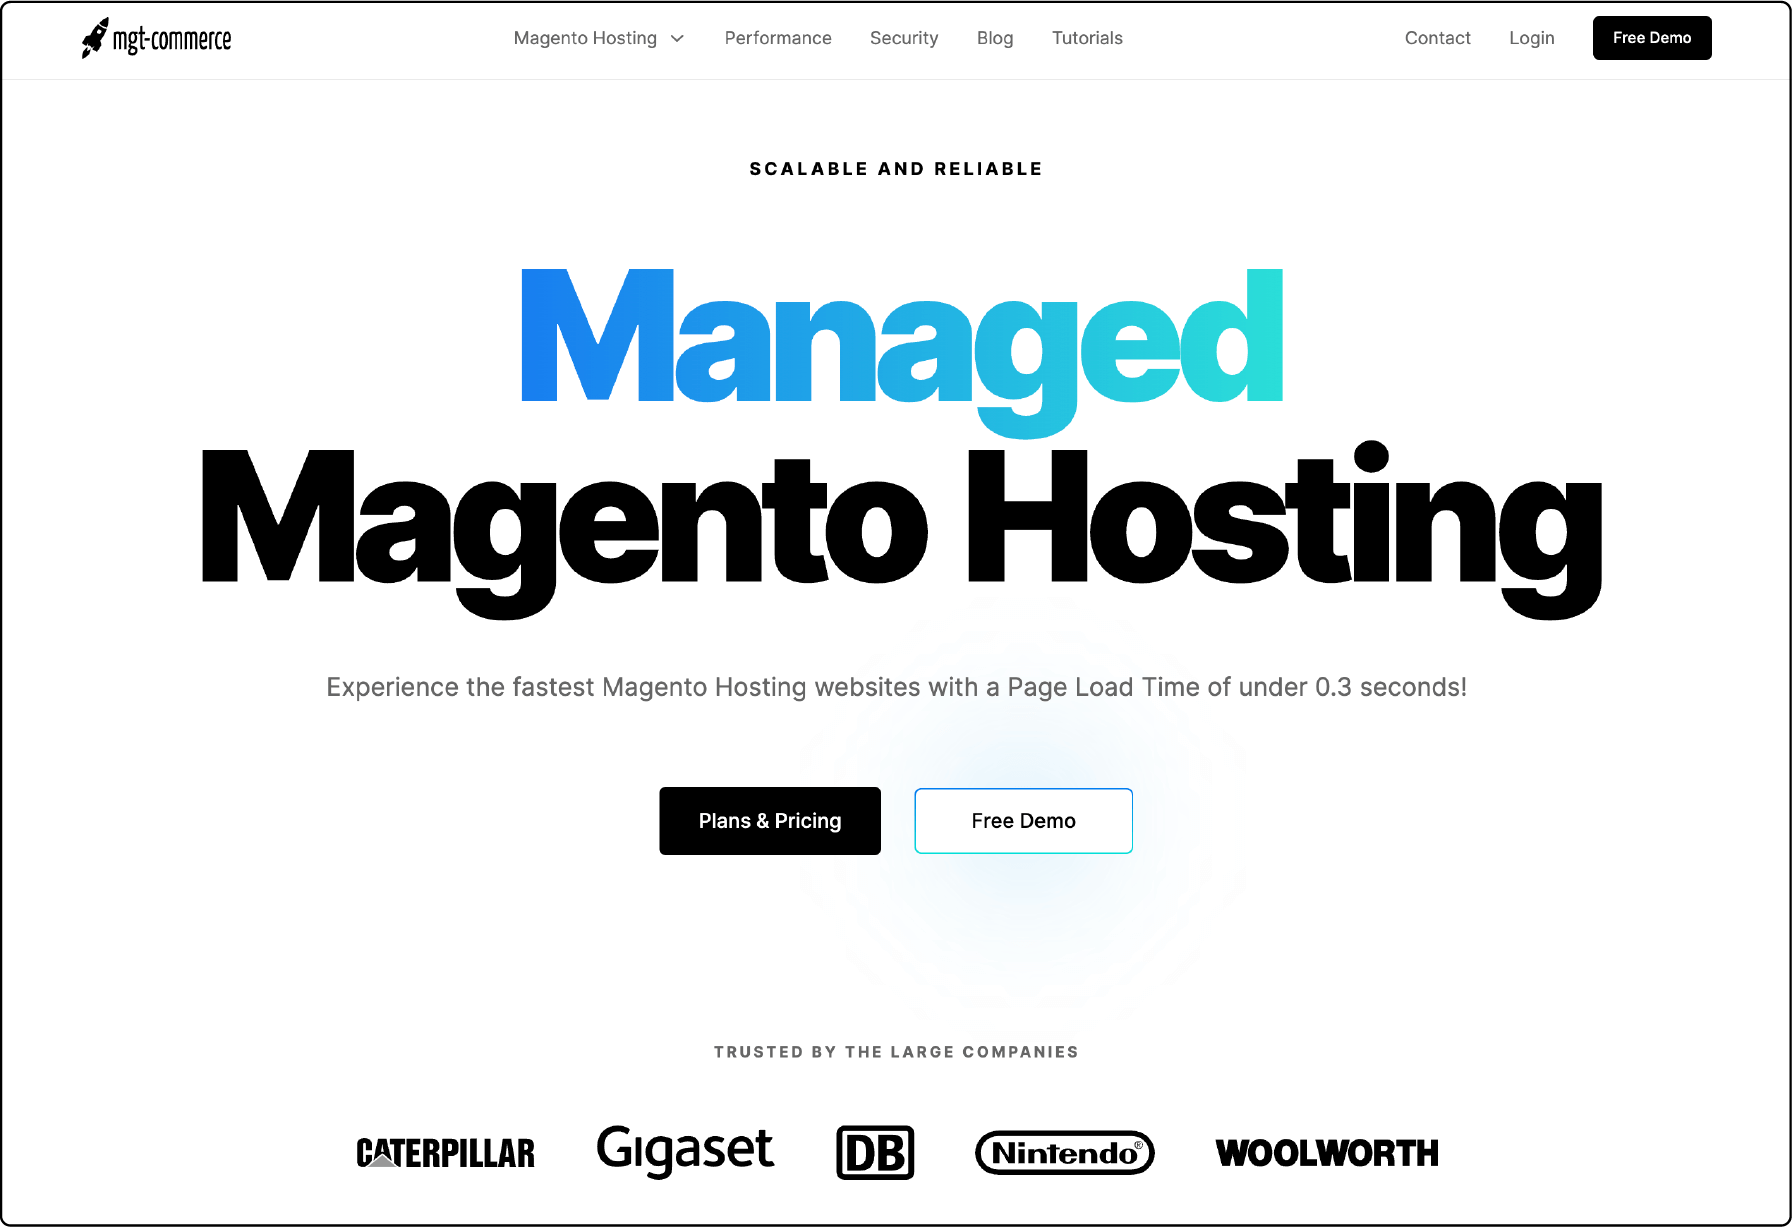 MGT-Commerce homepage showcasing Magento hosting services